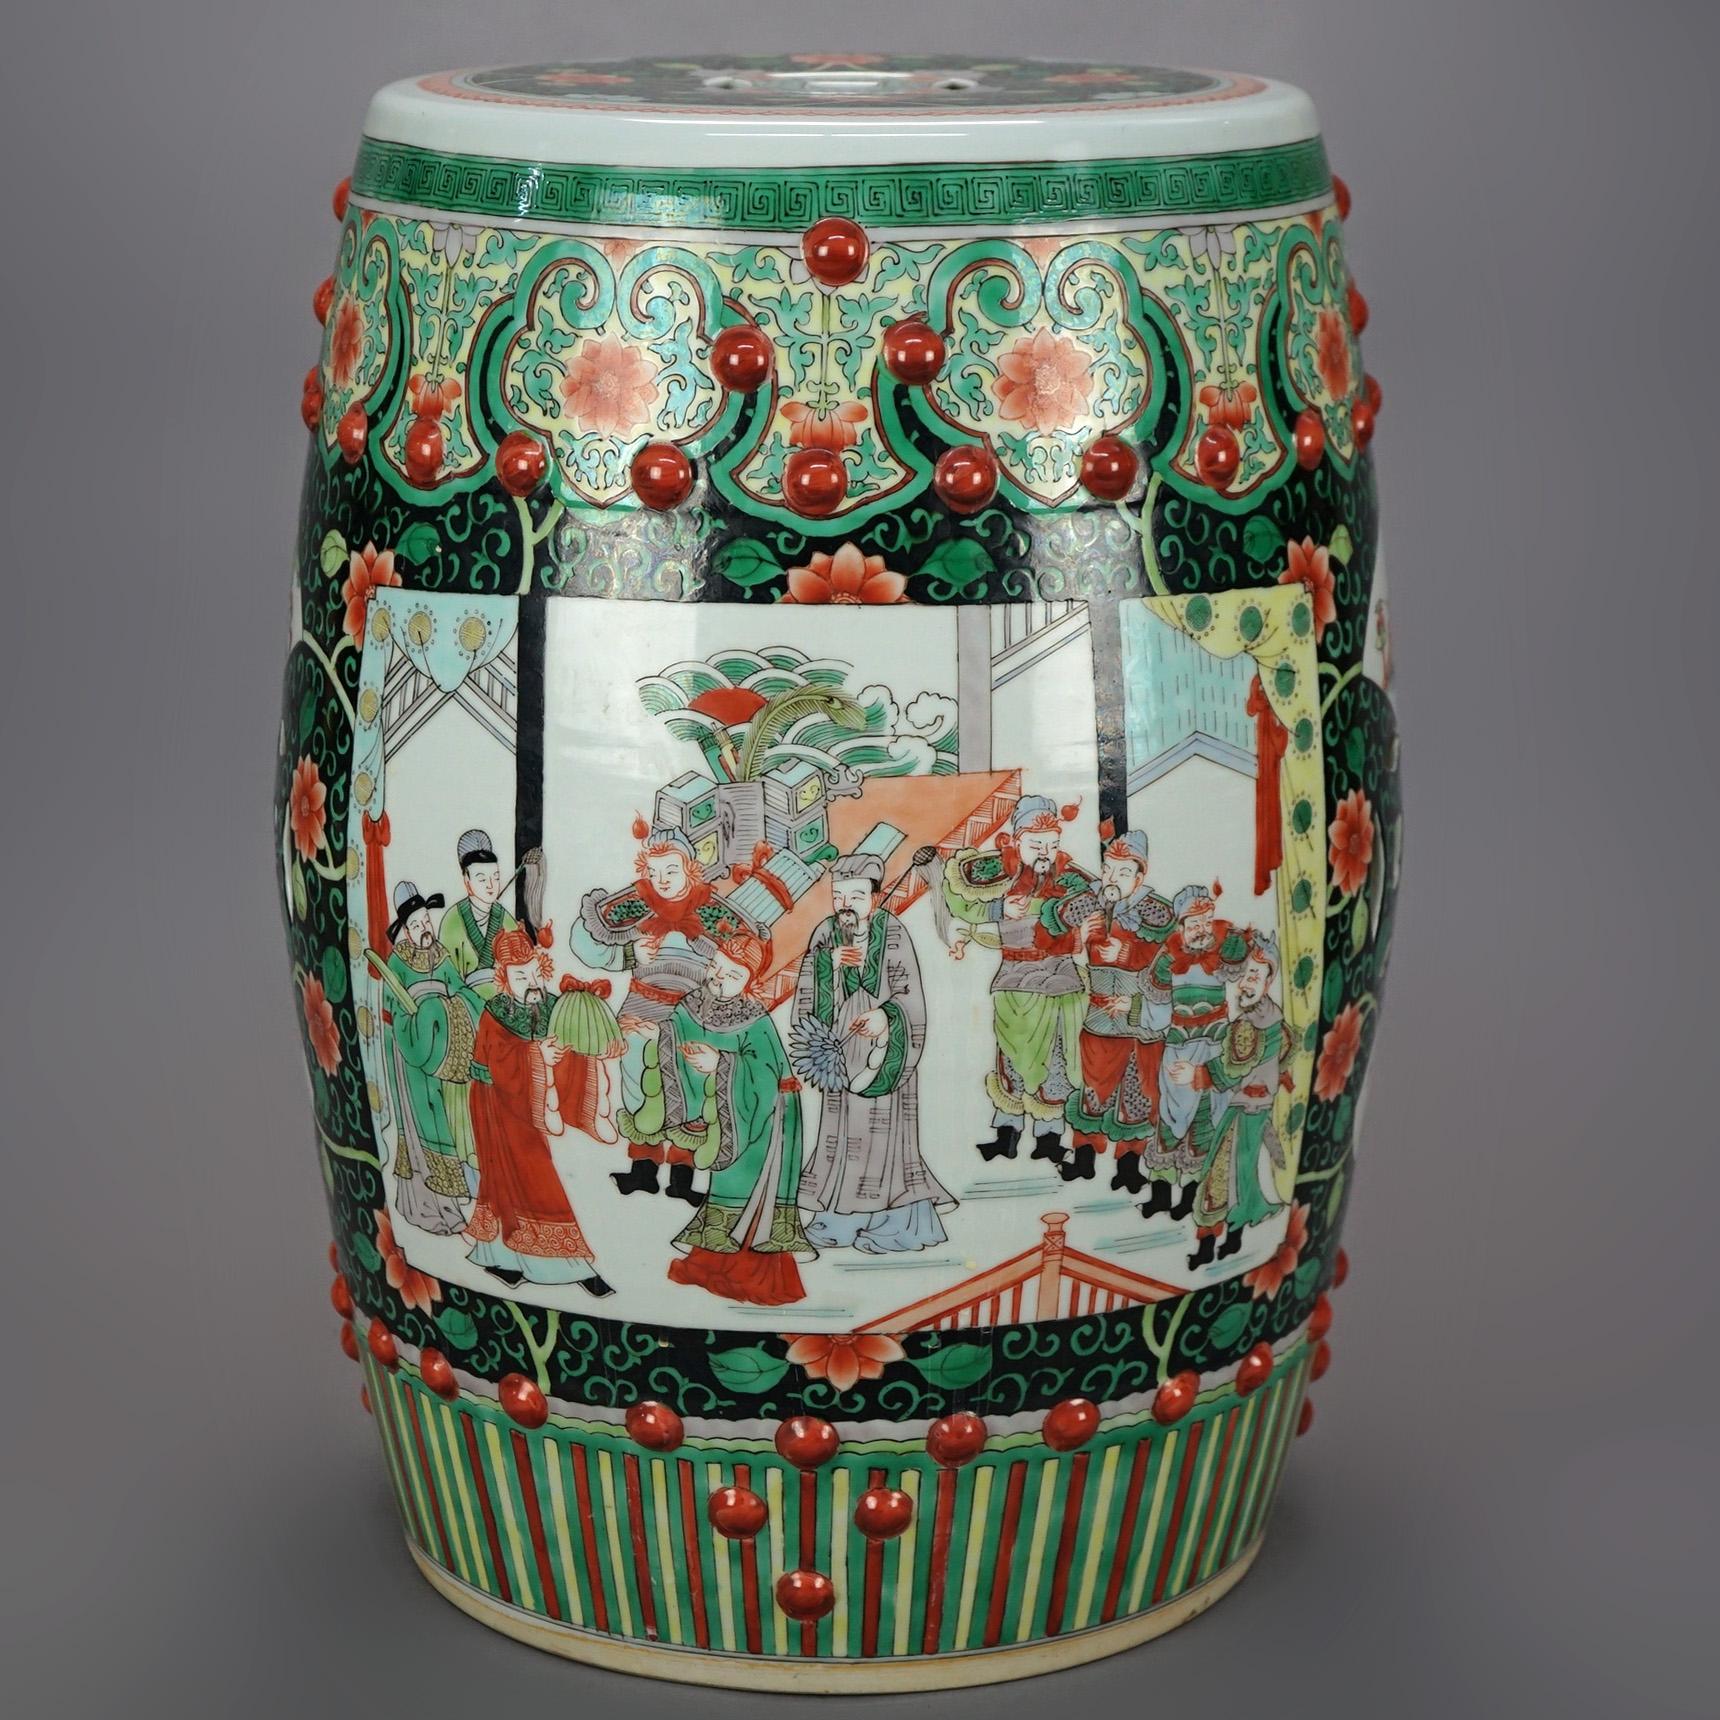 A Chinese porcelain garden seat offers porcelain construction with hand painted garden genre scenes with figures, 20th century

Measures - 19